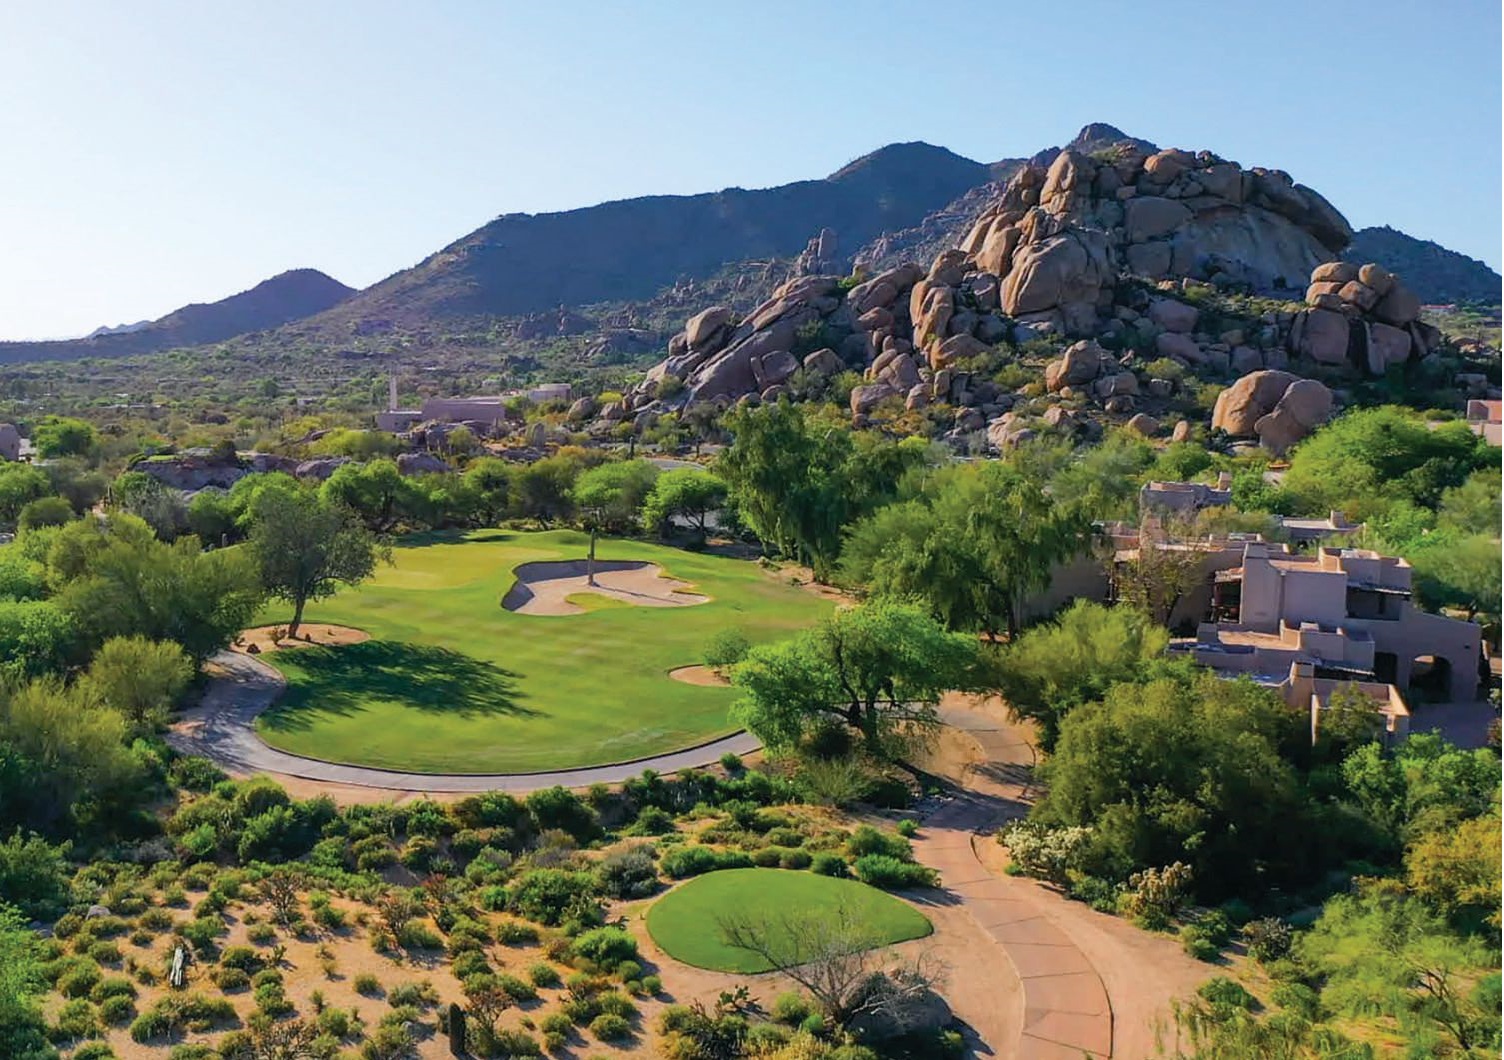 Beyond the pools and other plush amenities, Boulders Resort & Spa makes for a great golf getaway. BEST HIDEAWAY ANDAZ SCOTTSDALE RESORT & BUNGALOWS andazscottsdale.com BEST SPA VACATION JOYA SPA, OMNI RESORT & SPA AT MONTELUCIA omnihotels.com BEST BOUTIQUE HOTEL SENNA HOUSE thesennahouse.com BEST HIDDEN GEM STAYCATION THE BREXLEY thebrexley.com BEST HOTEL POOL THE PHOENICIAN thephoenician.com BEST RENOVATION ARIZONA BILTMORE arizonabiltmore.com PHOTO COURTESY OF BRANDS